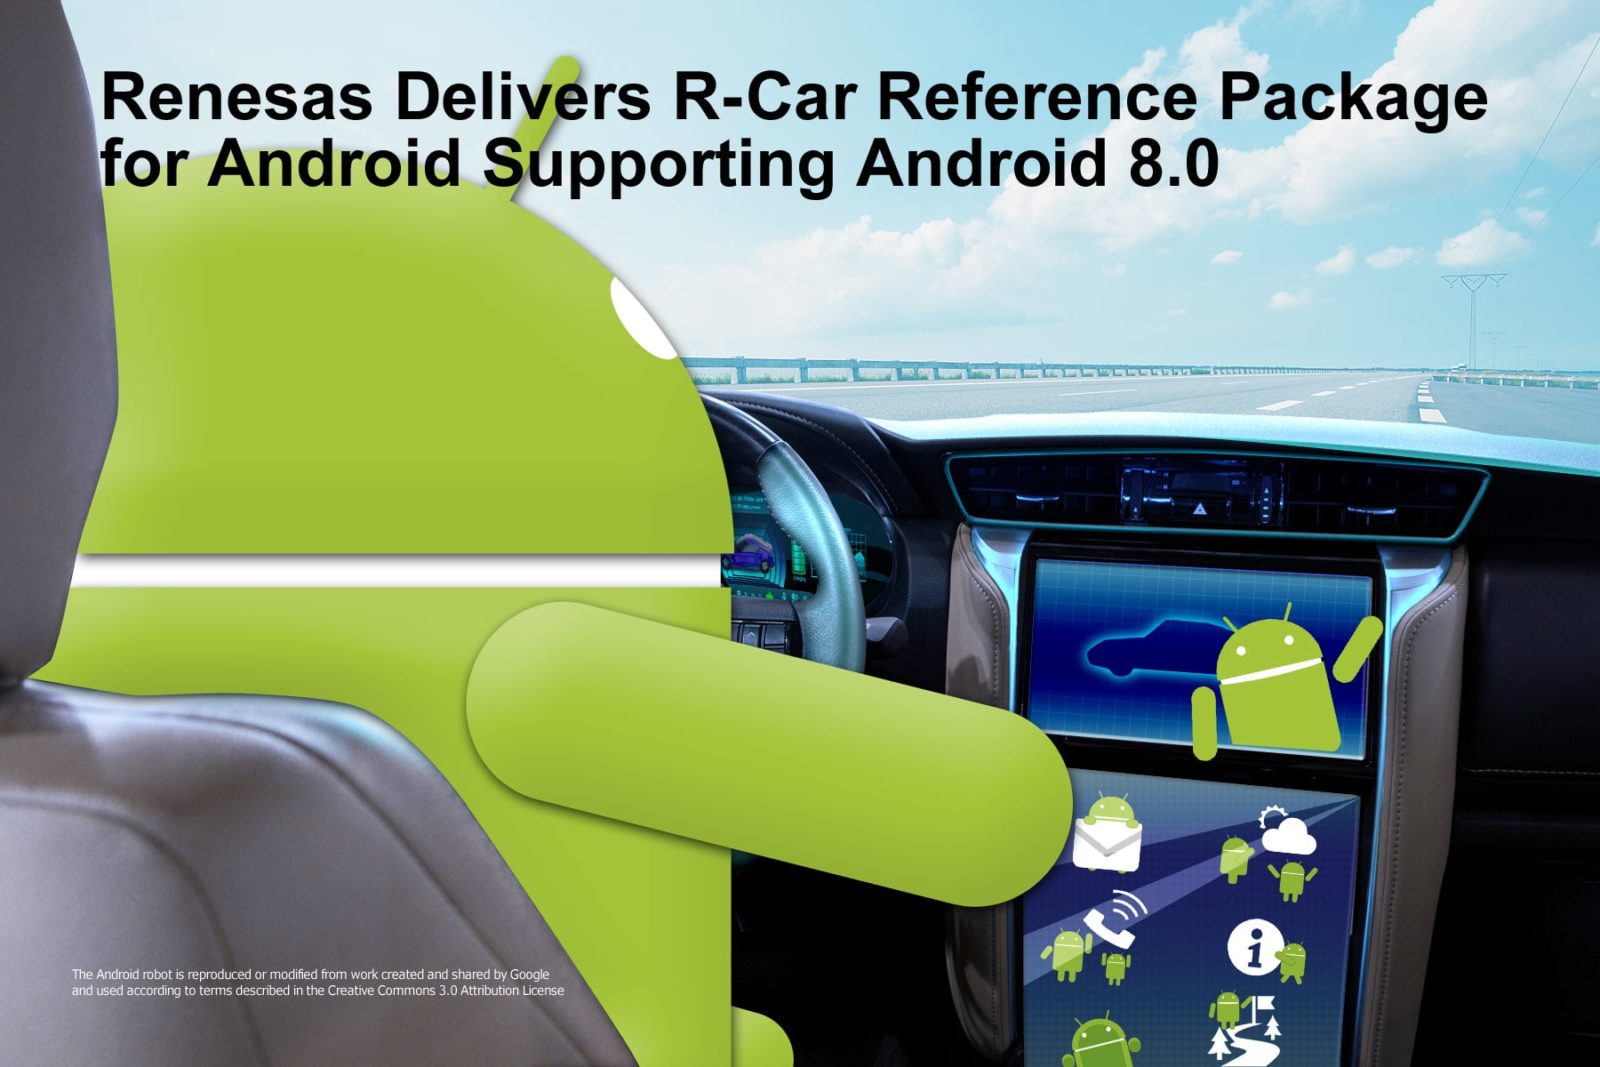 Connected Cars Smarten Up With Android